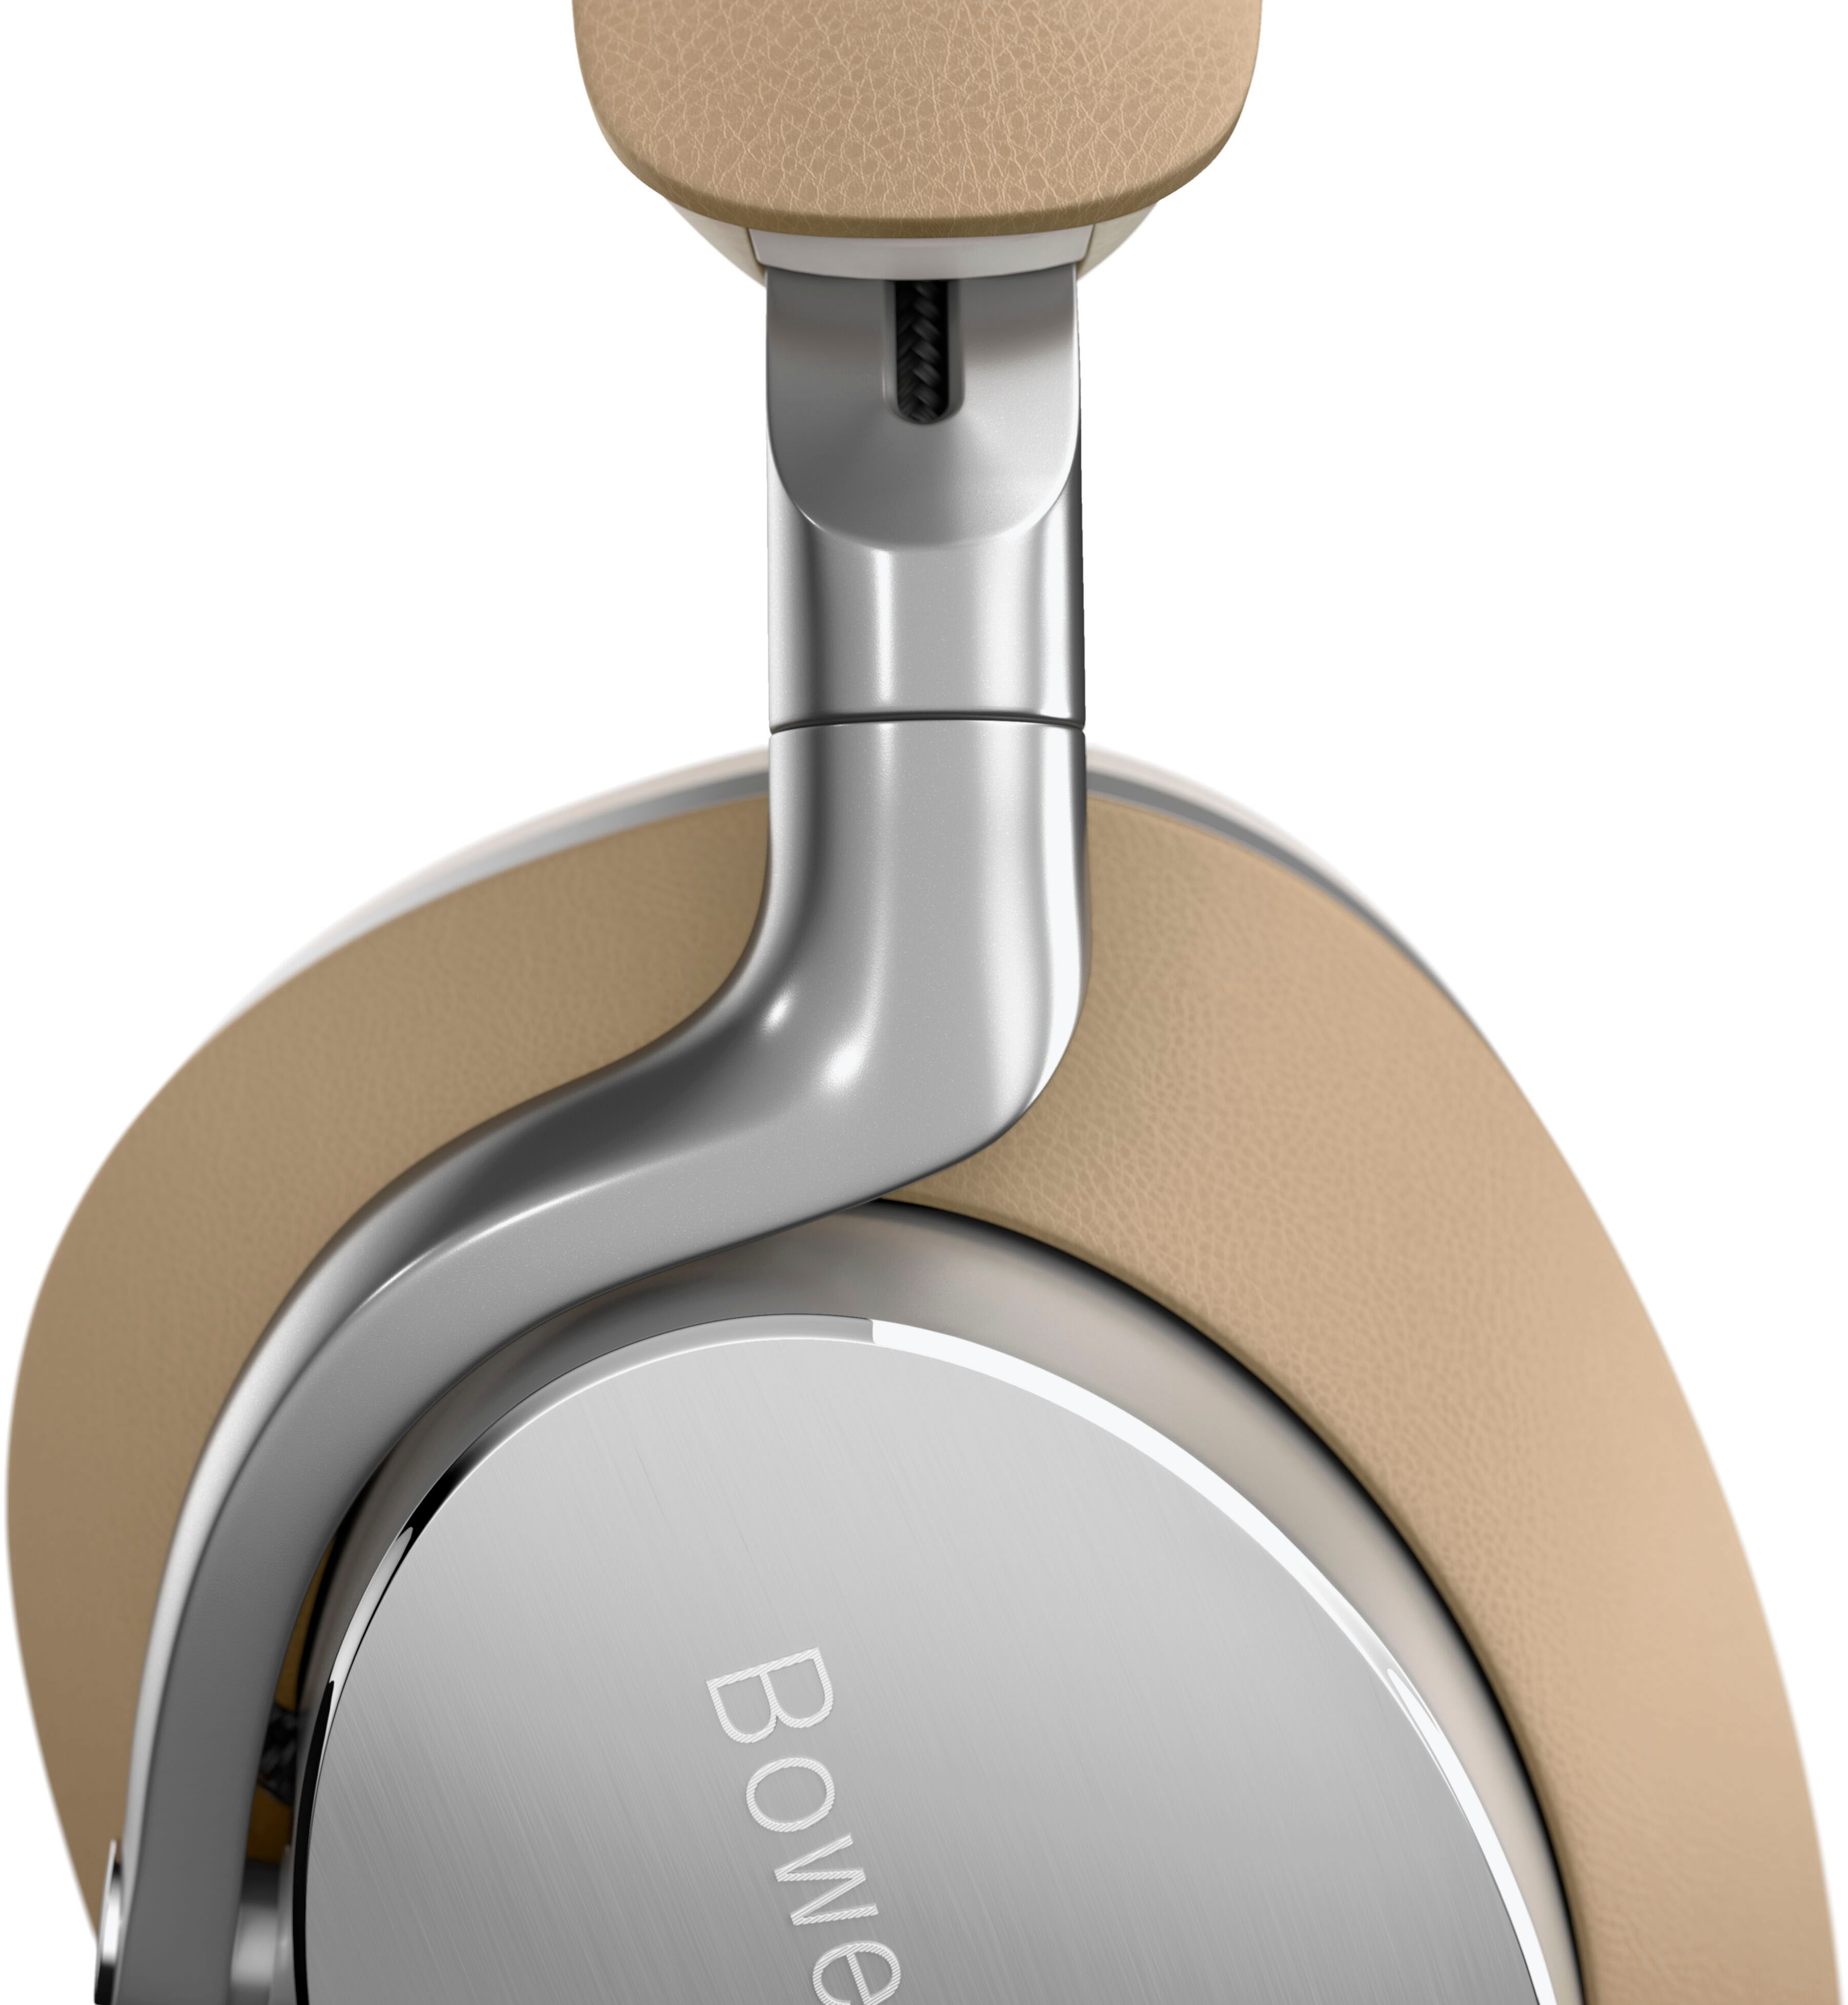 Bowers & Wilkins Releases Flagship PX8 Headphones, Price Jumps to $699 -  CNET